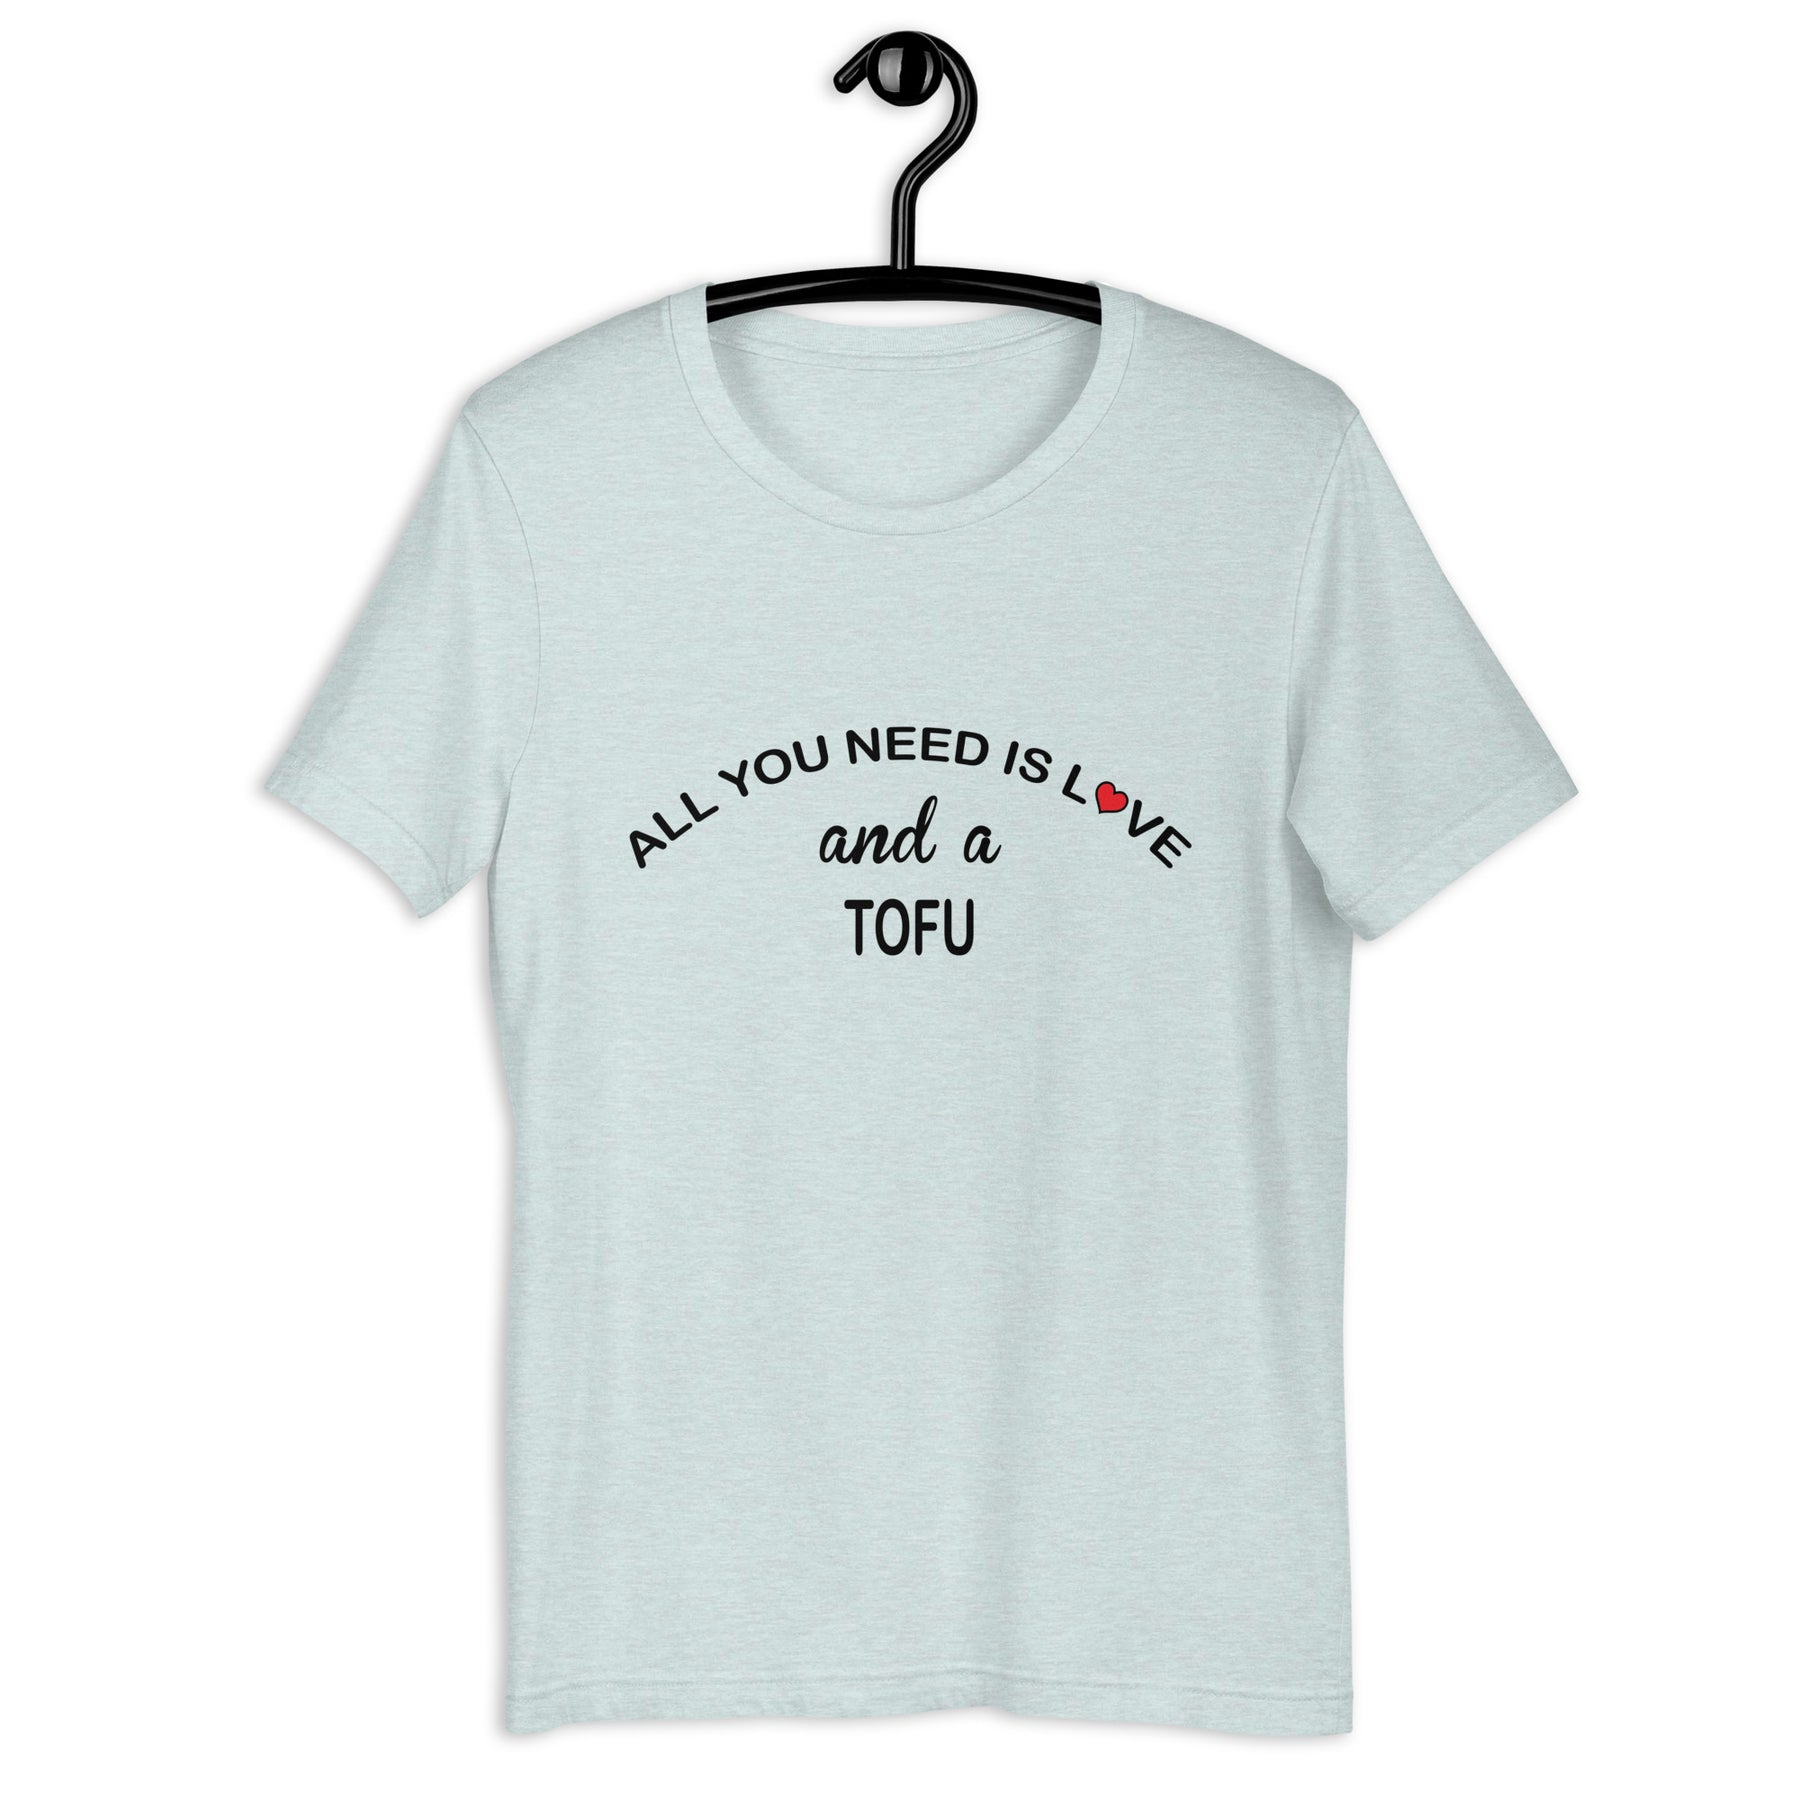 ALL YOU NEED IS LOVE...TOFU Colored t-shirt